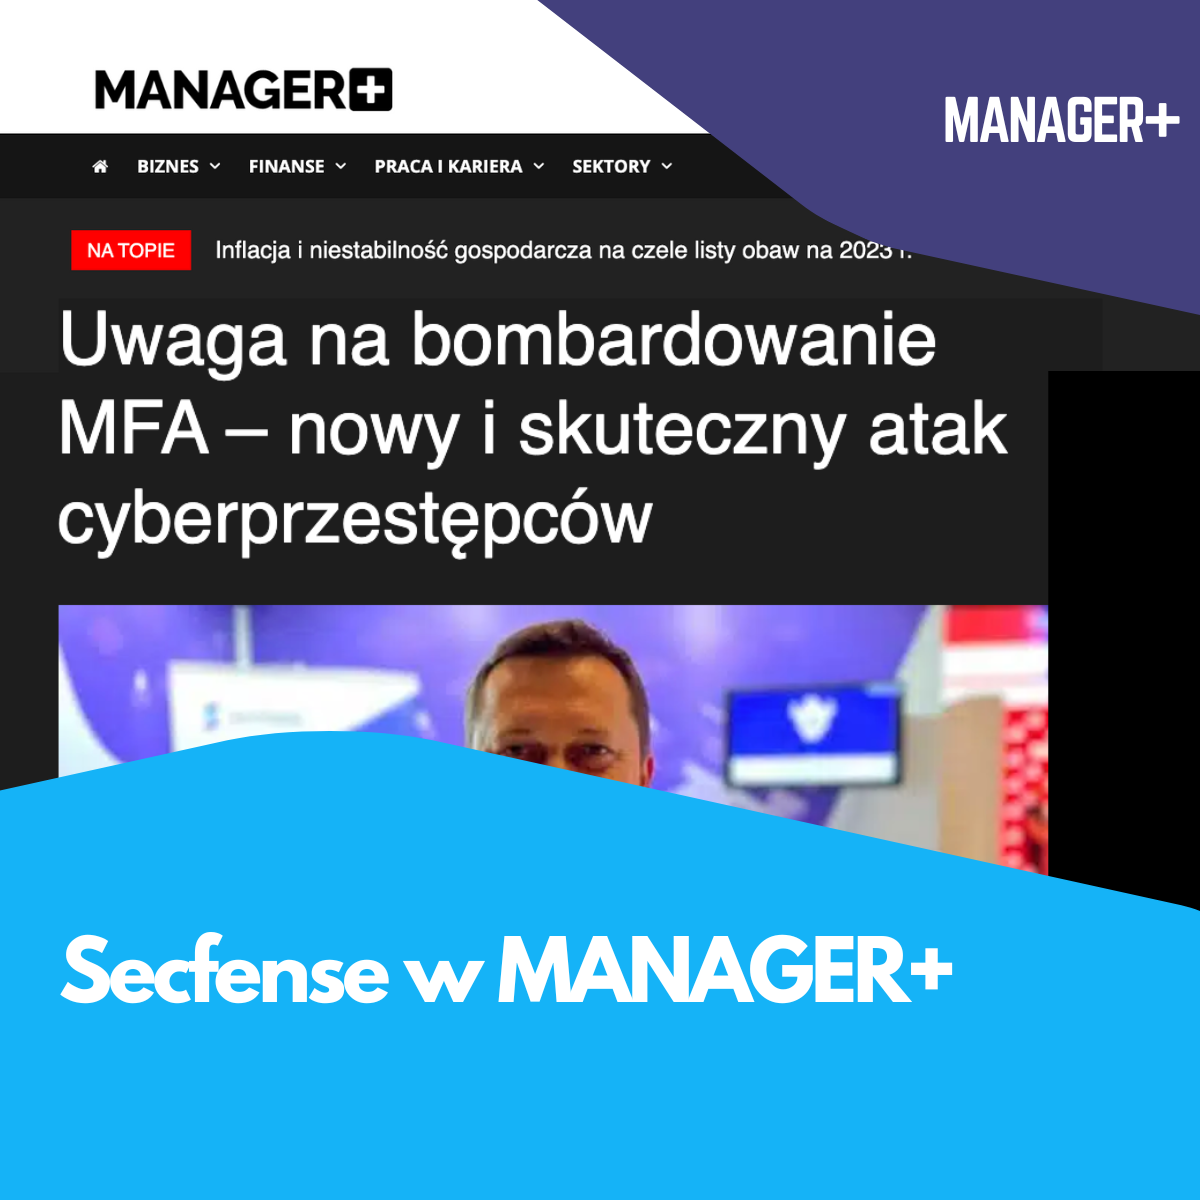 Secfense w MANAGER+